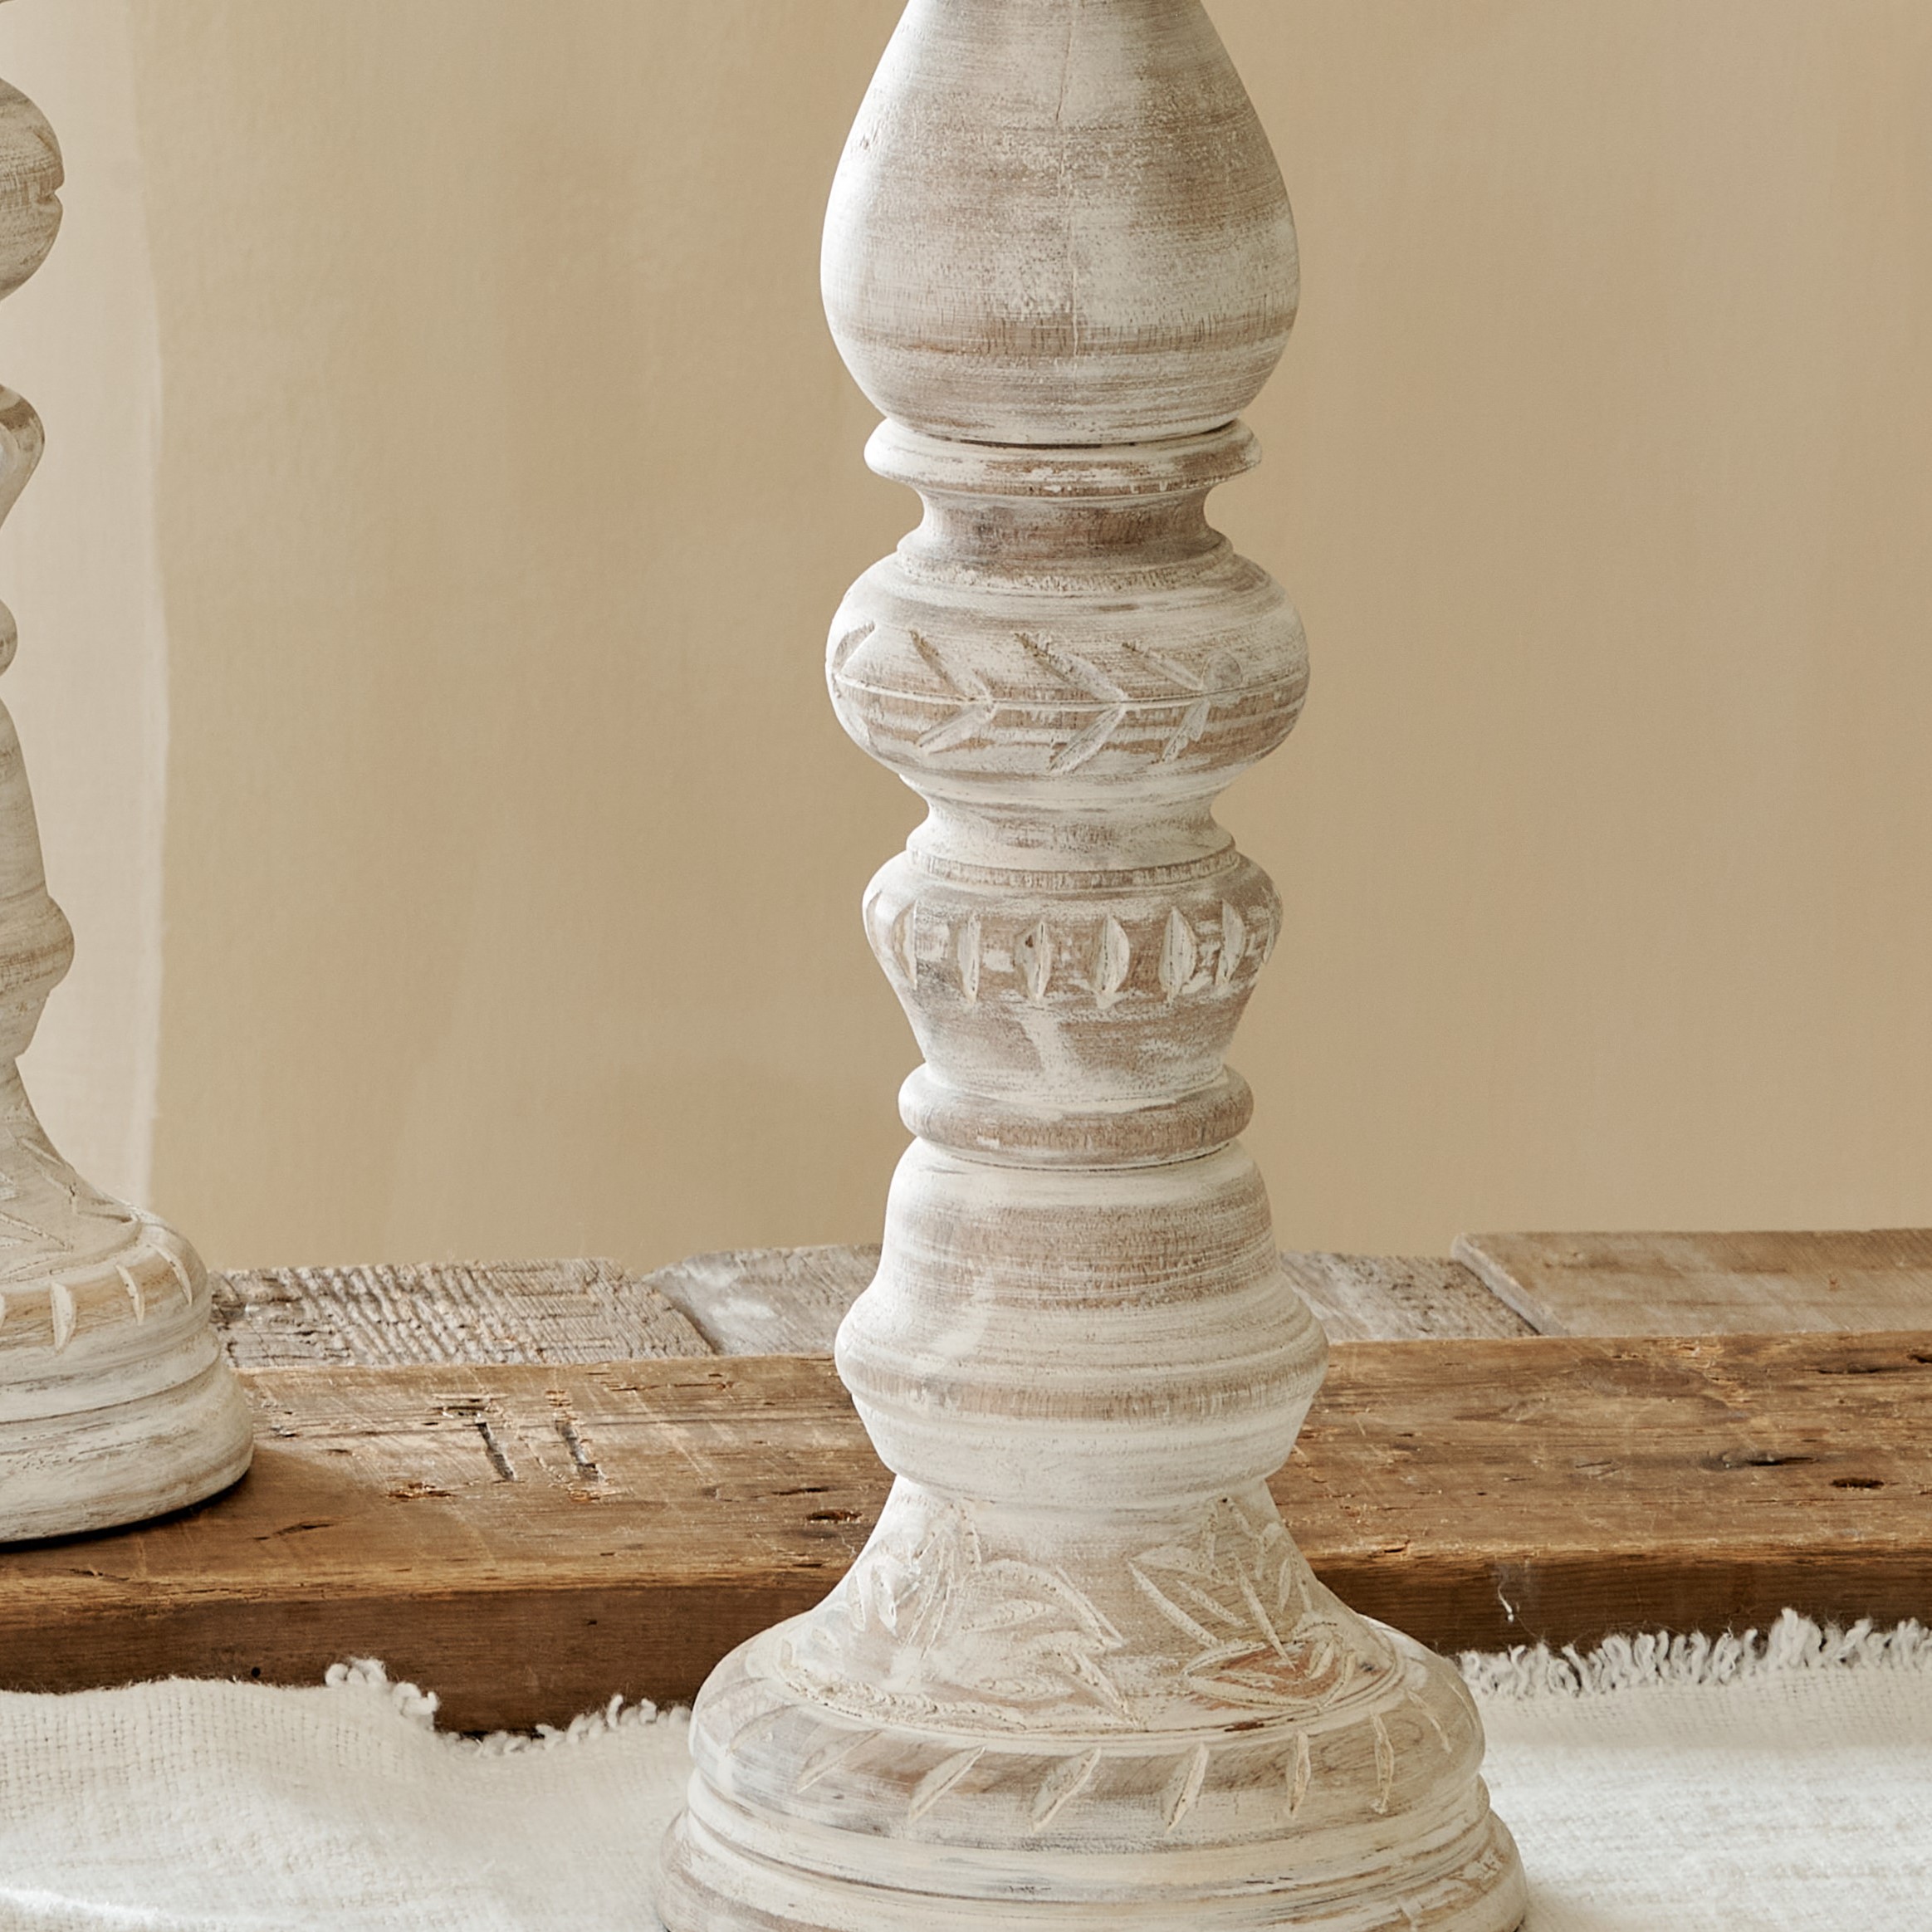 Close up of distressed tall white candlesticks on cotton runner on wooden table